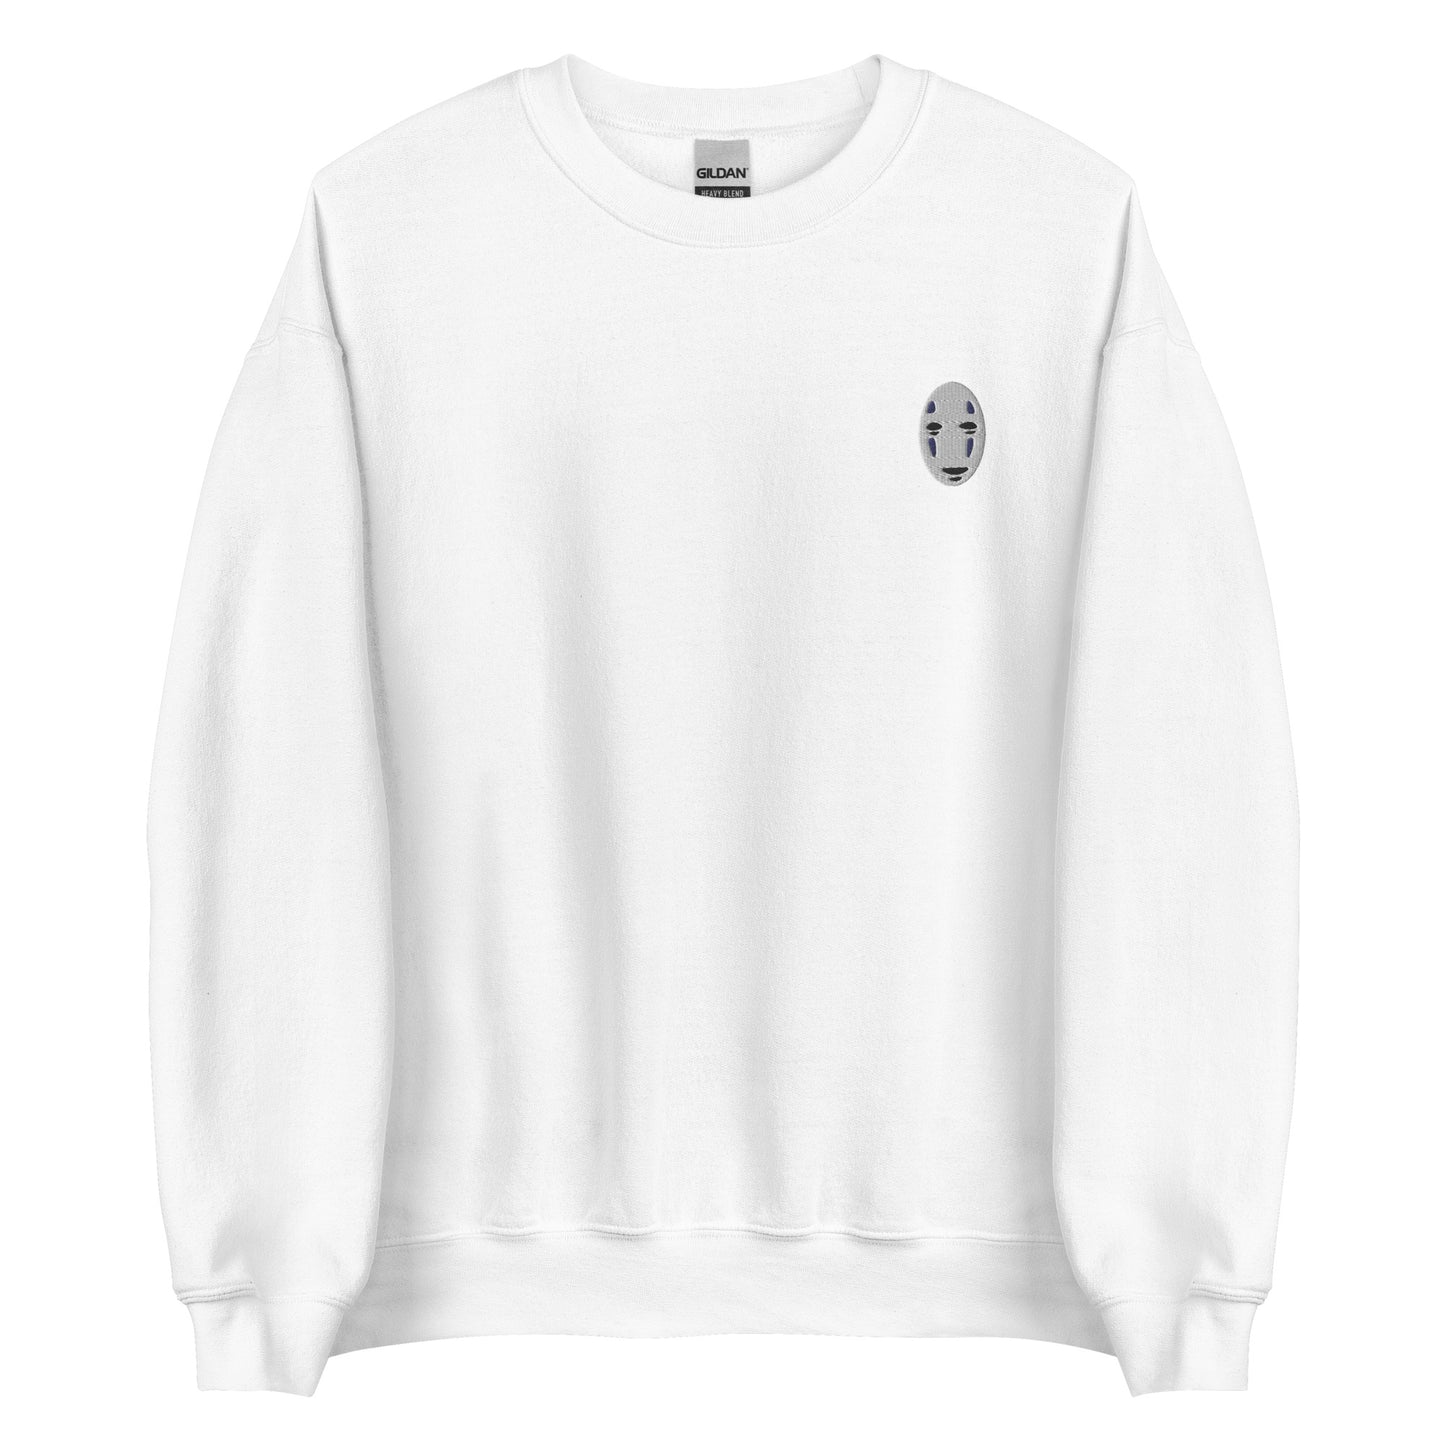 No faces Embroidered Unisex Sweatshirt Embroidery Away